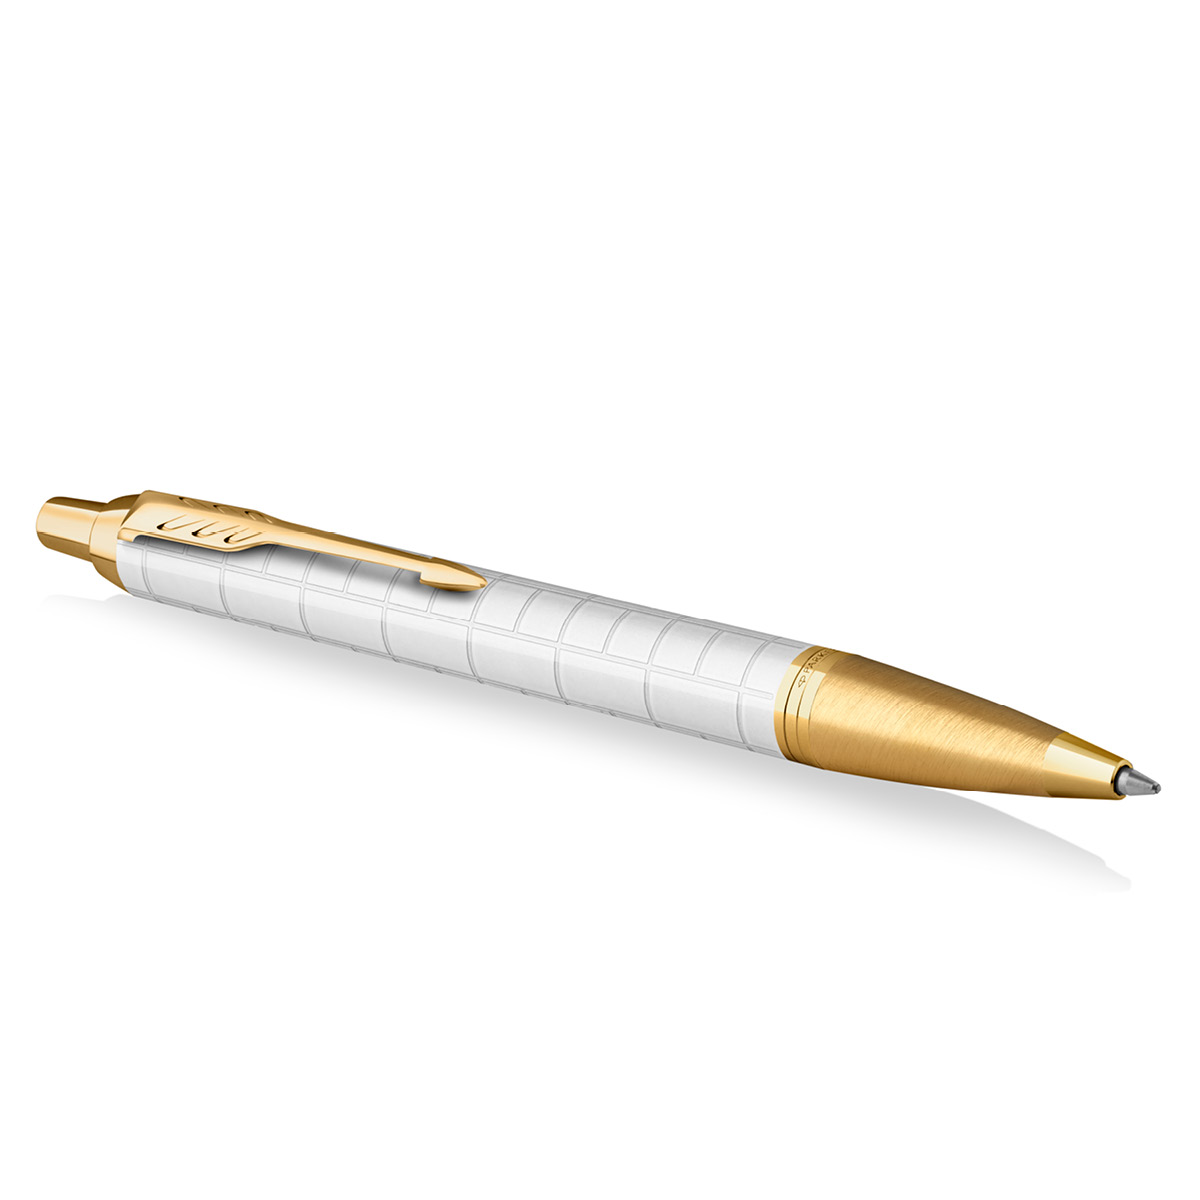 IM Premium Pearl/Gold Ballpoint pen in the group Pens / Fine Writing / Ballpoint Pens at Pen Store (112686)